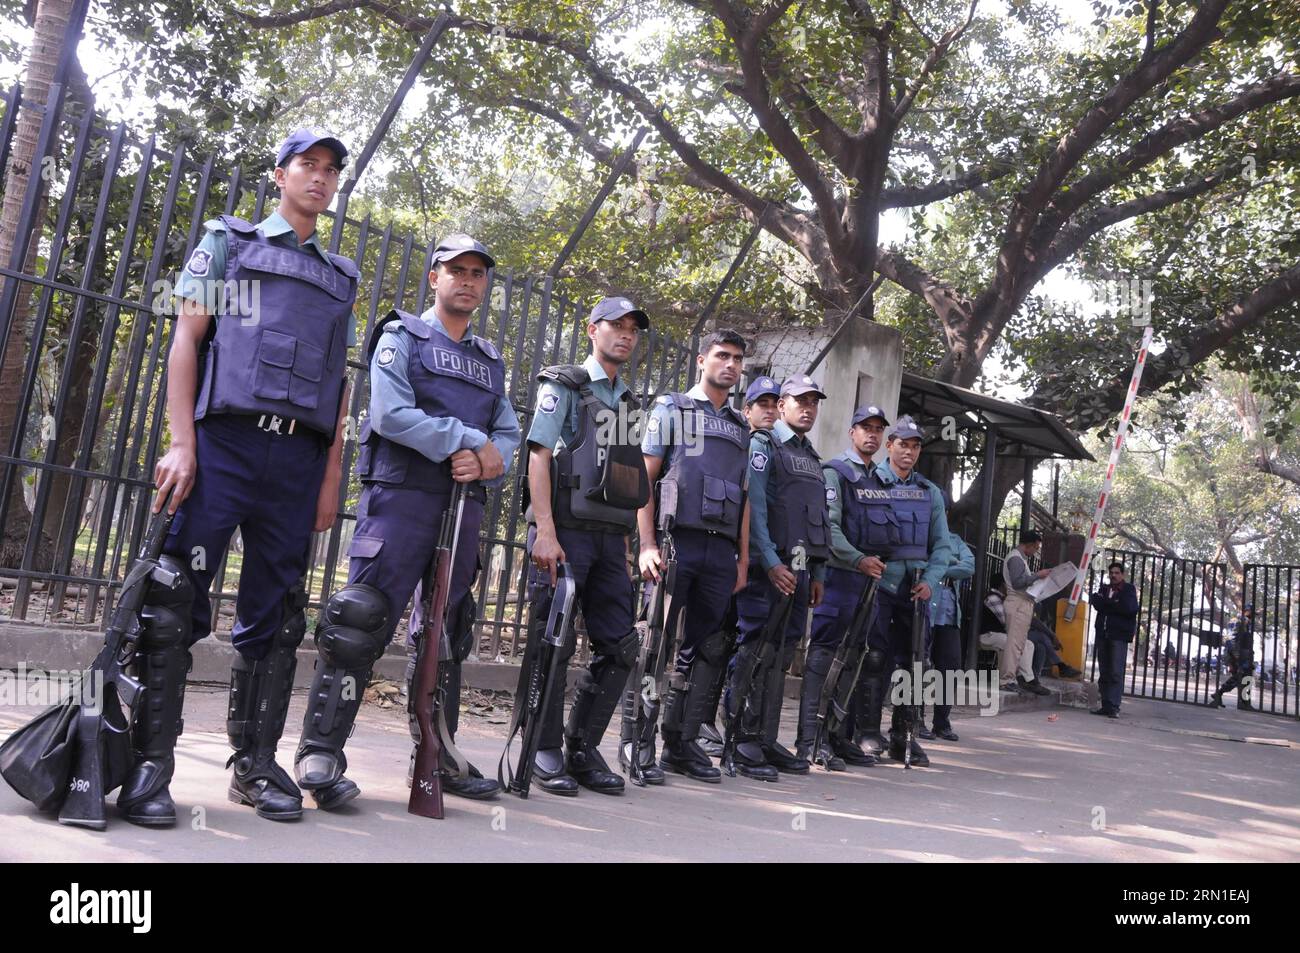 (141223) -- DHAKA, Dec. 23, 2014 -- Bangladeshi police stand guard in front of the Supreme Court during a verdict announcement in Dhaka, Bangladesh, Dec. 23, 2014. Bangladesh s International Crimes Tribunal (ICT)-1 found the former Minister Syed Mohammed Kaiser guilty of collaborating with Pakistani forces and committing war crimes including mass killings during the country s Liberation War in 1971, and has sentenced him to death. ) BANGLADESH-DHAKA-WAR CRIME-VERDICT SharifulxIslam PUBLICATIONxNOTxINxCHN   Dhaka DEC 23 2014 Bangladeshi Police stand Guard in Front of The Supreme Court during a Stock Photo